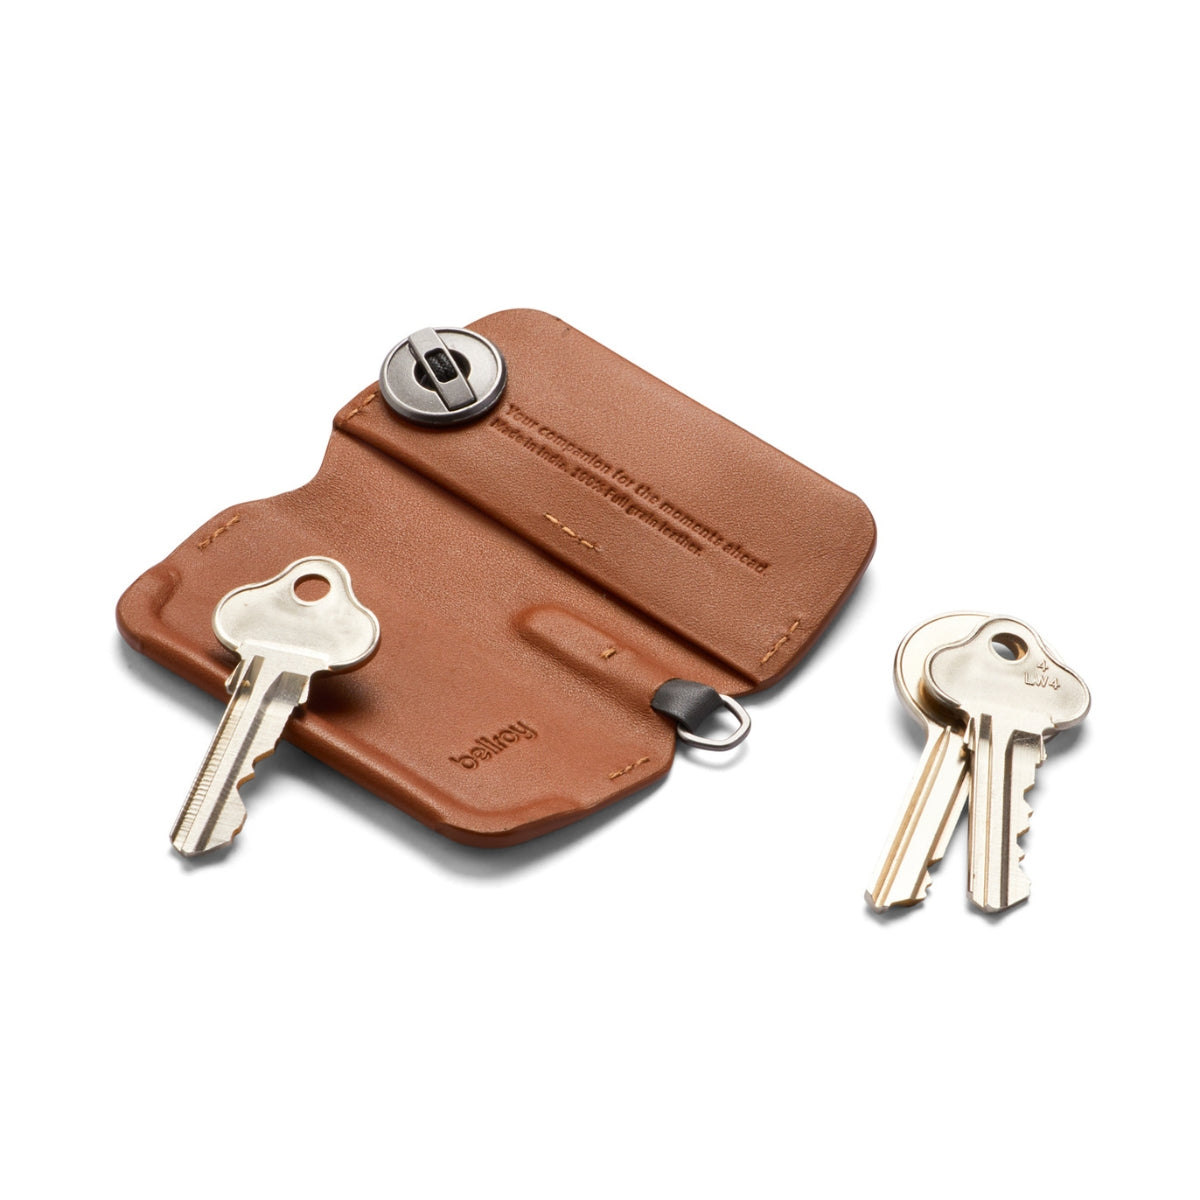 Bellroy Key Cover (Third Edition) in Caramel